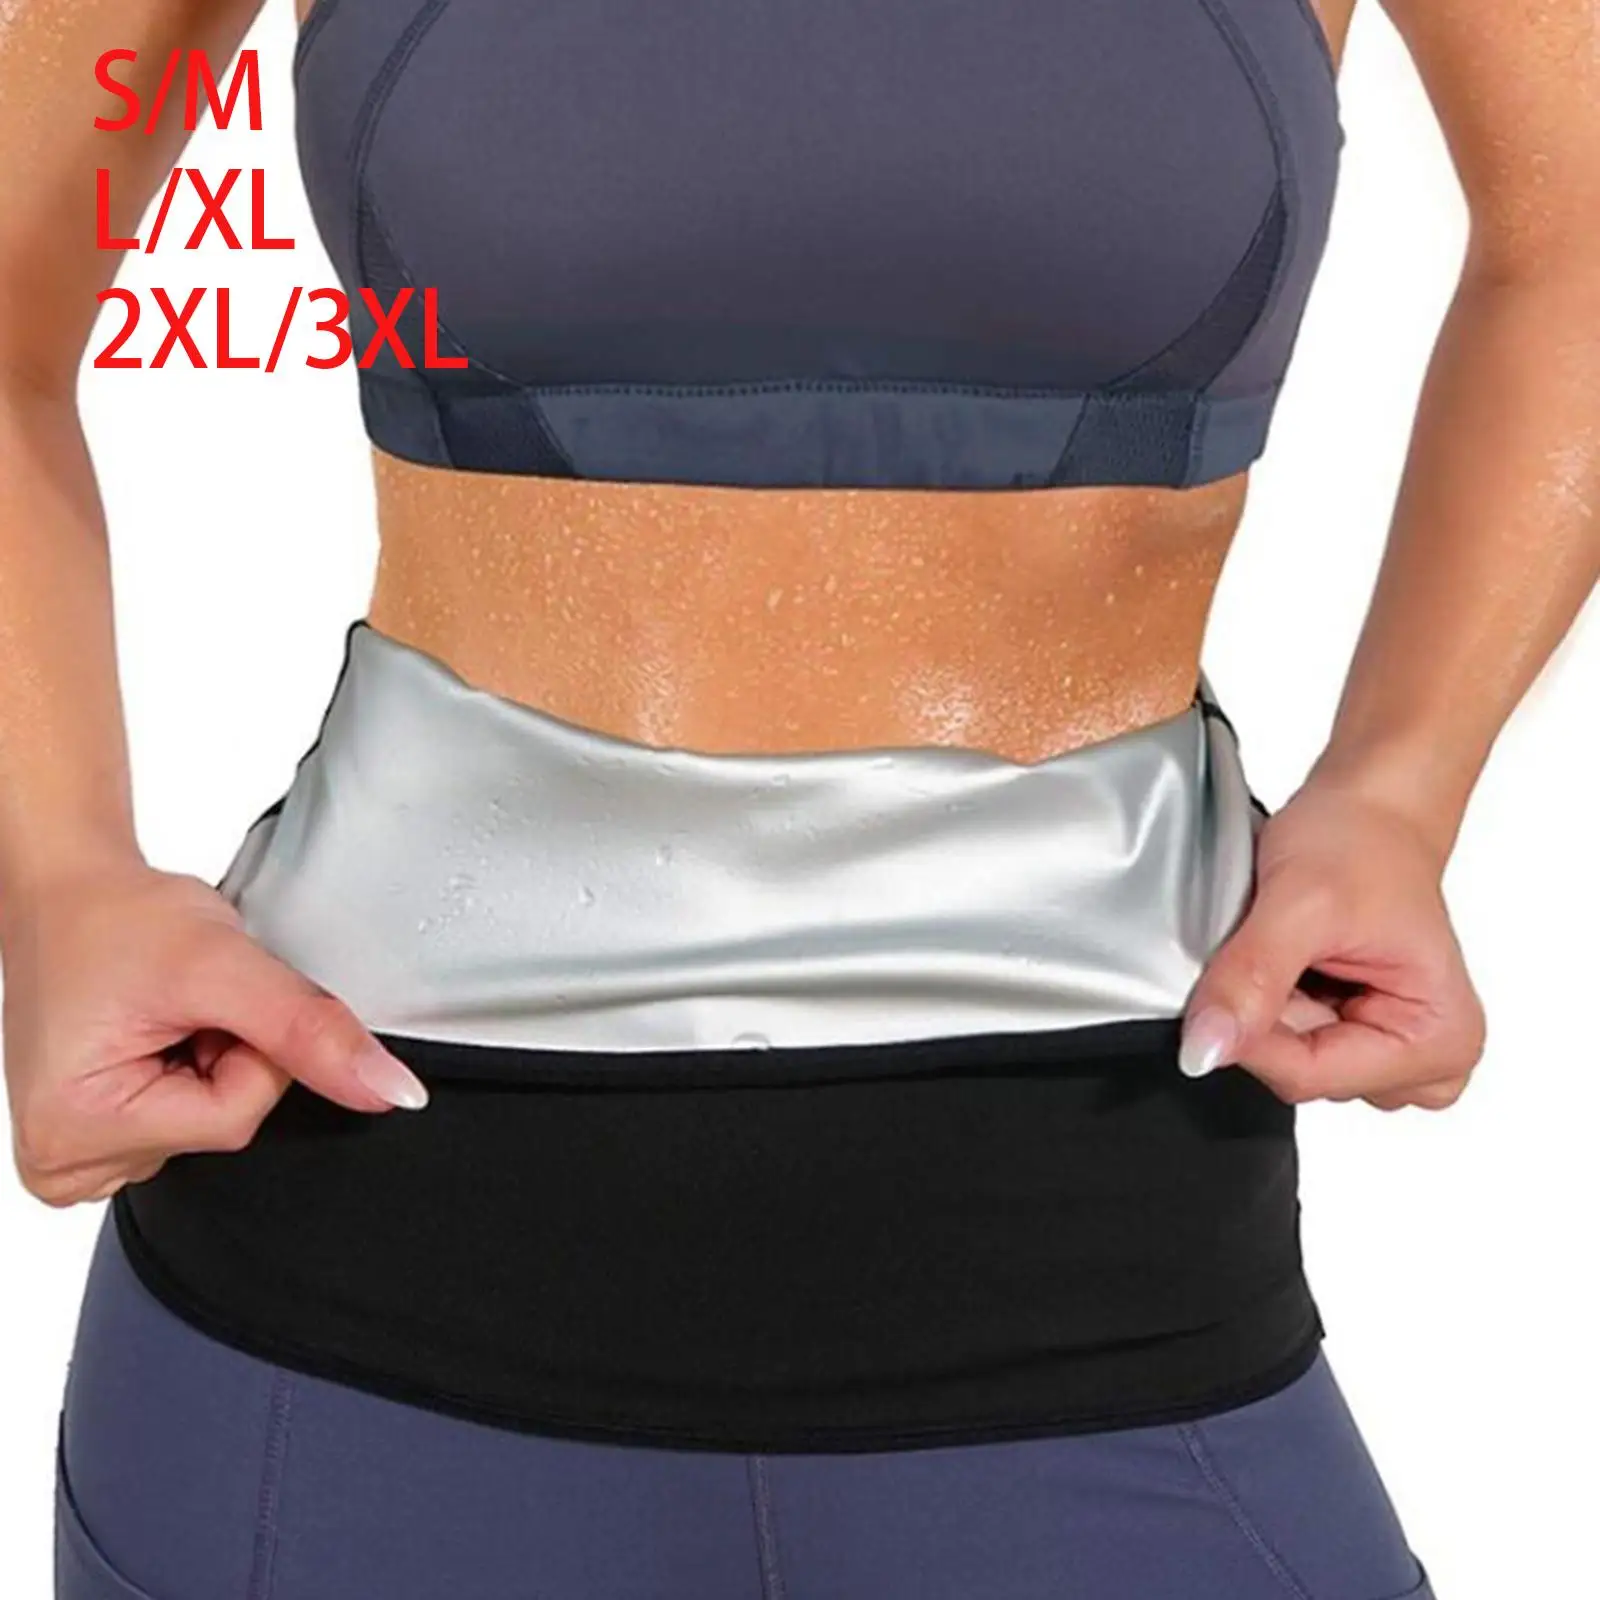 Sweat Waist Trimmer Activewear Low Back and Abdominal Support Waist Cincher for Workout Exercise Yoga Indoor Outdoor